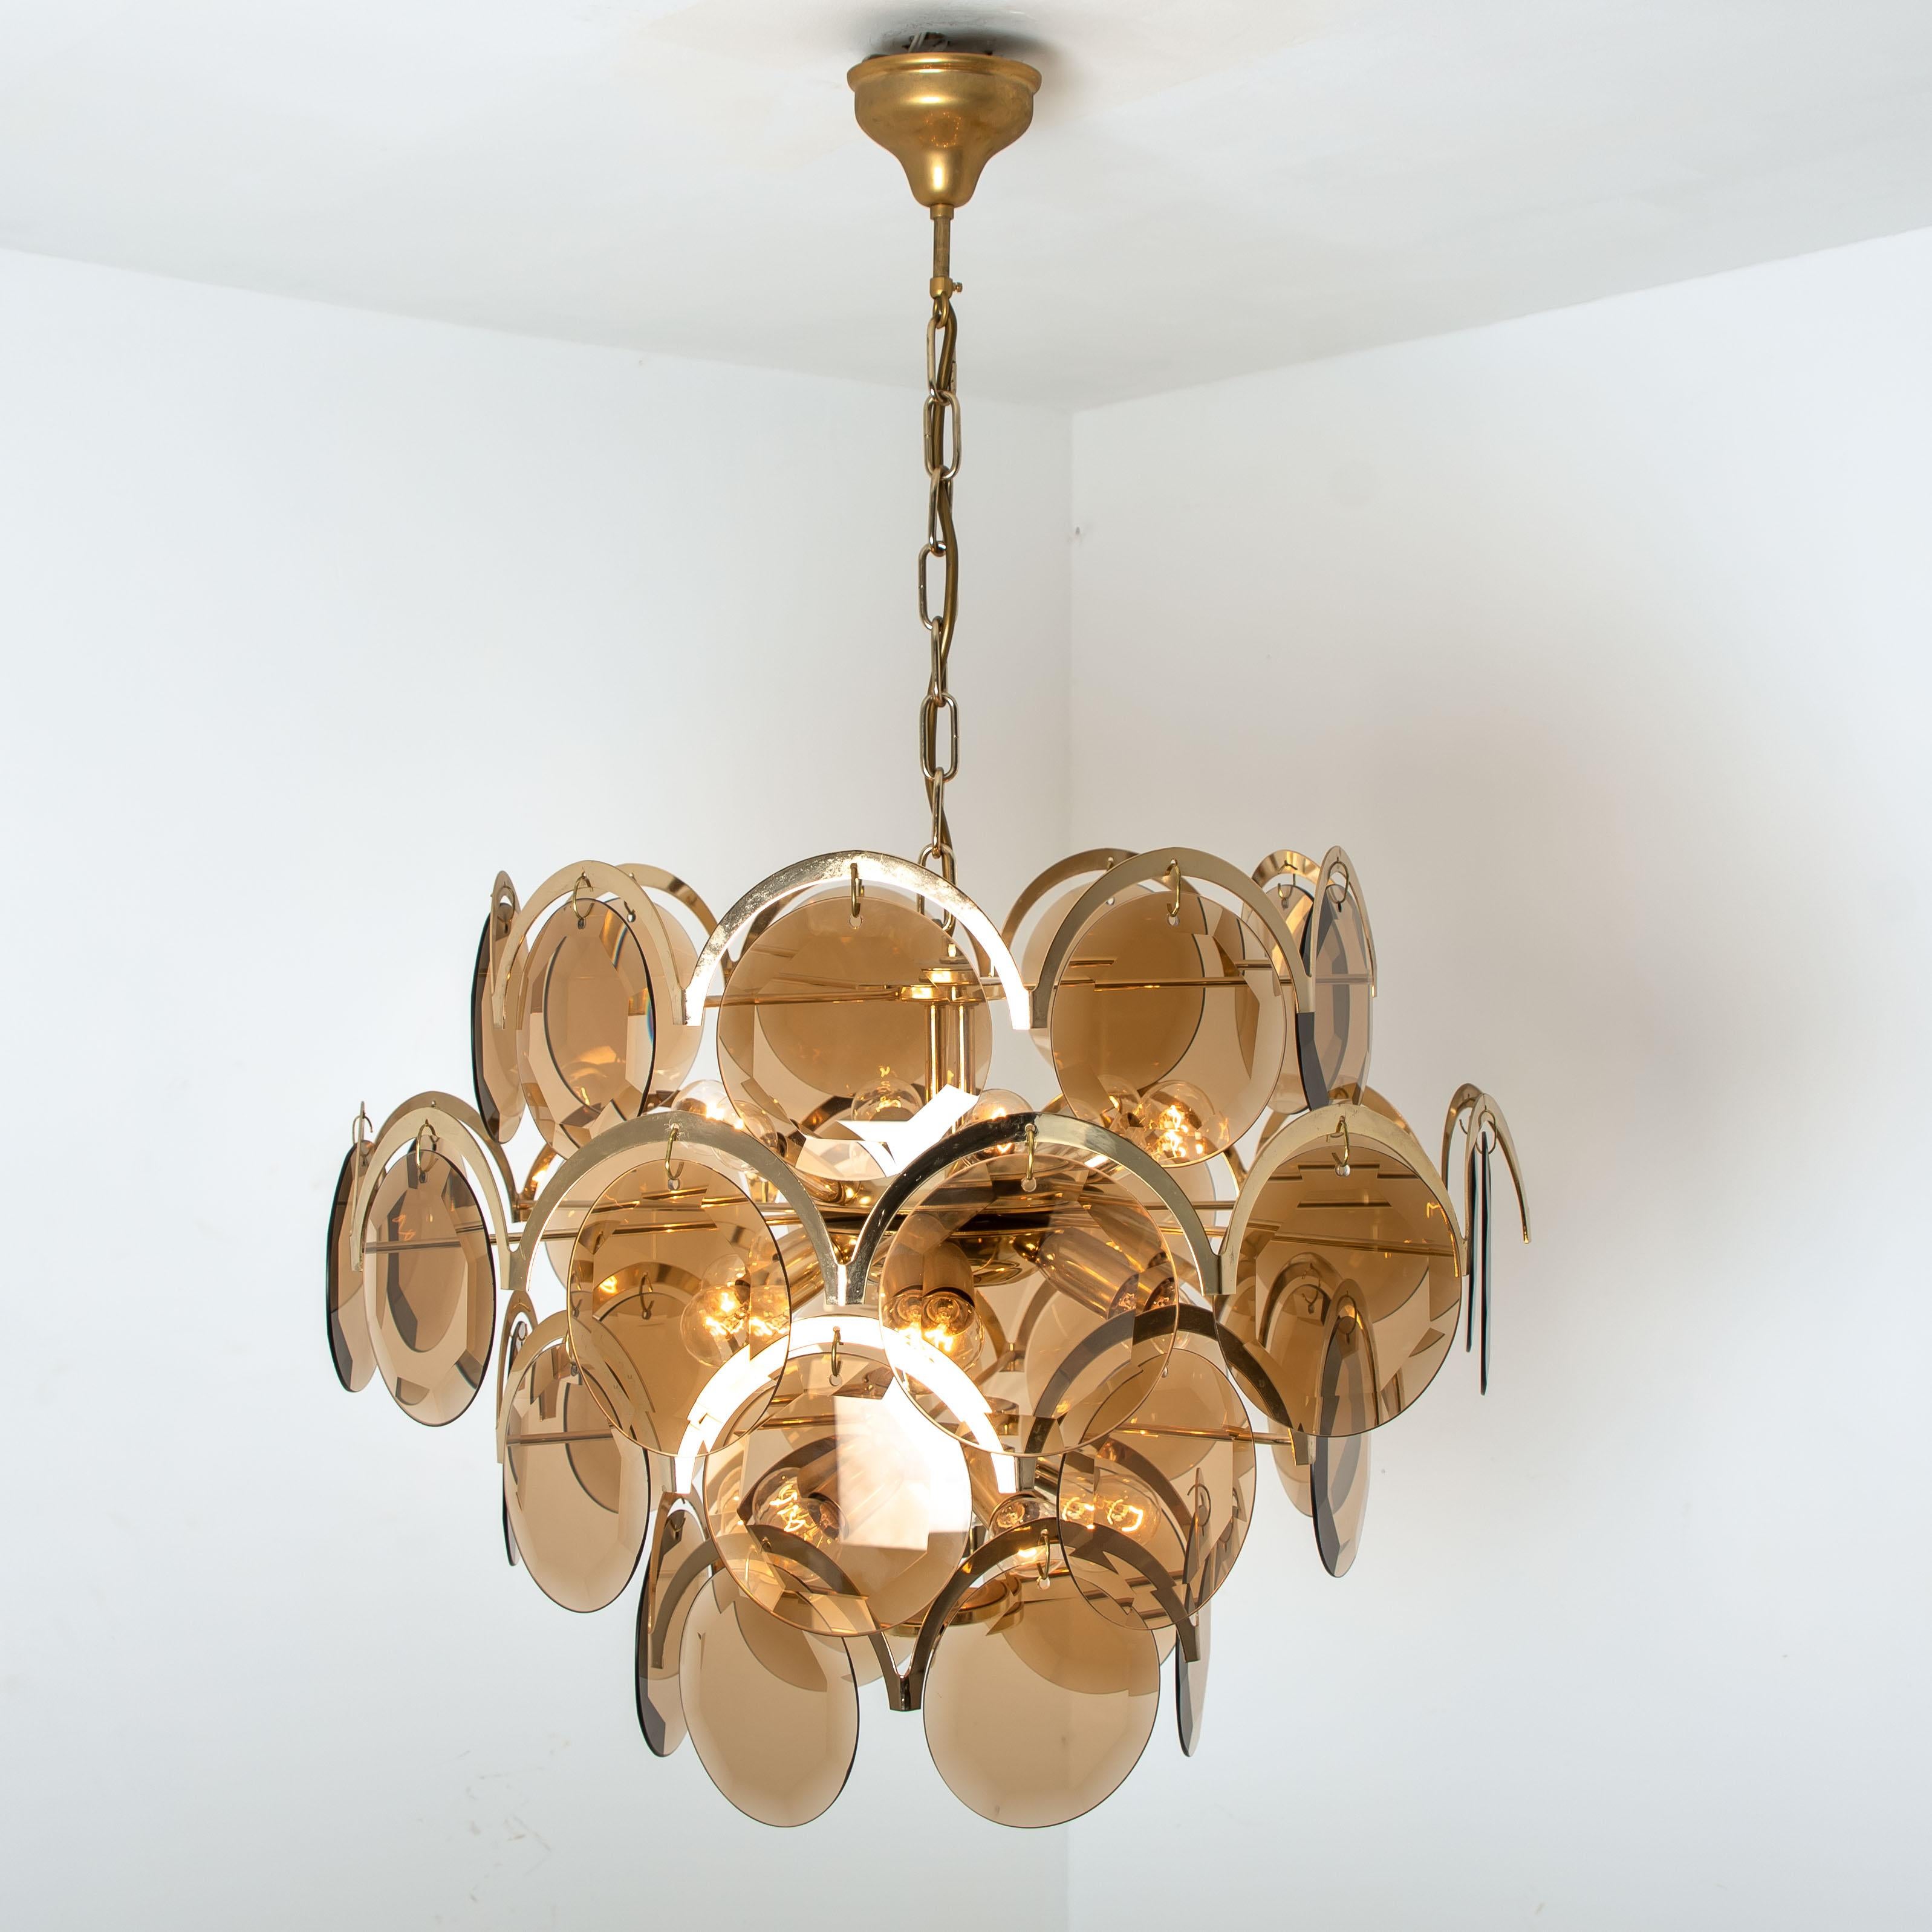 Large Smoked Glass and Brass Chandelier in the Style of Vistosi, Italy For Sale 4